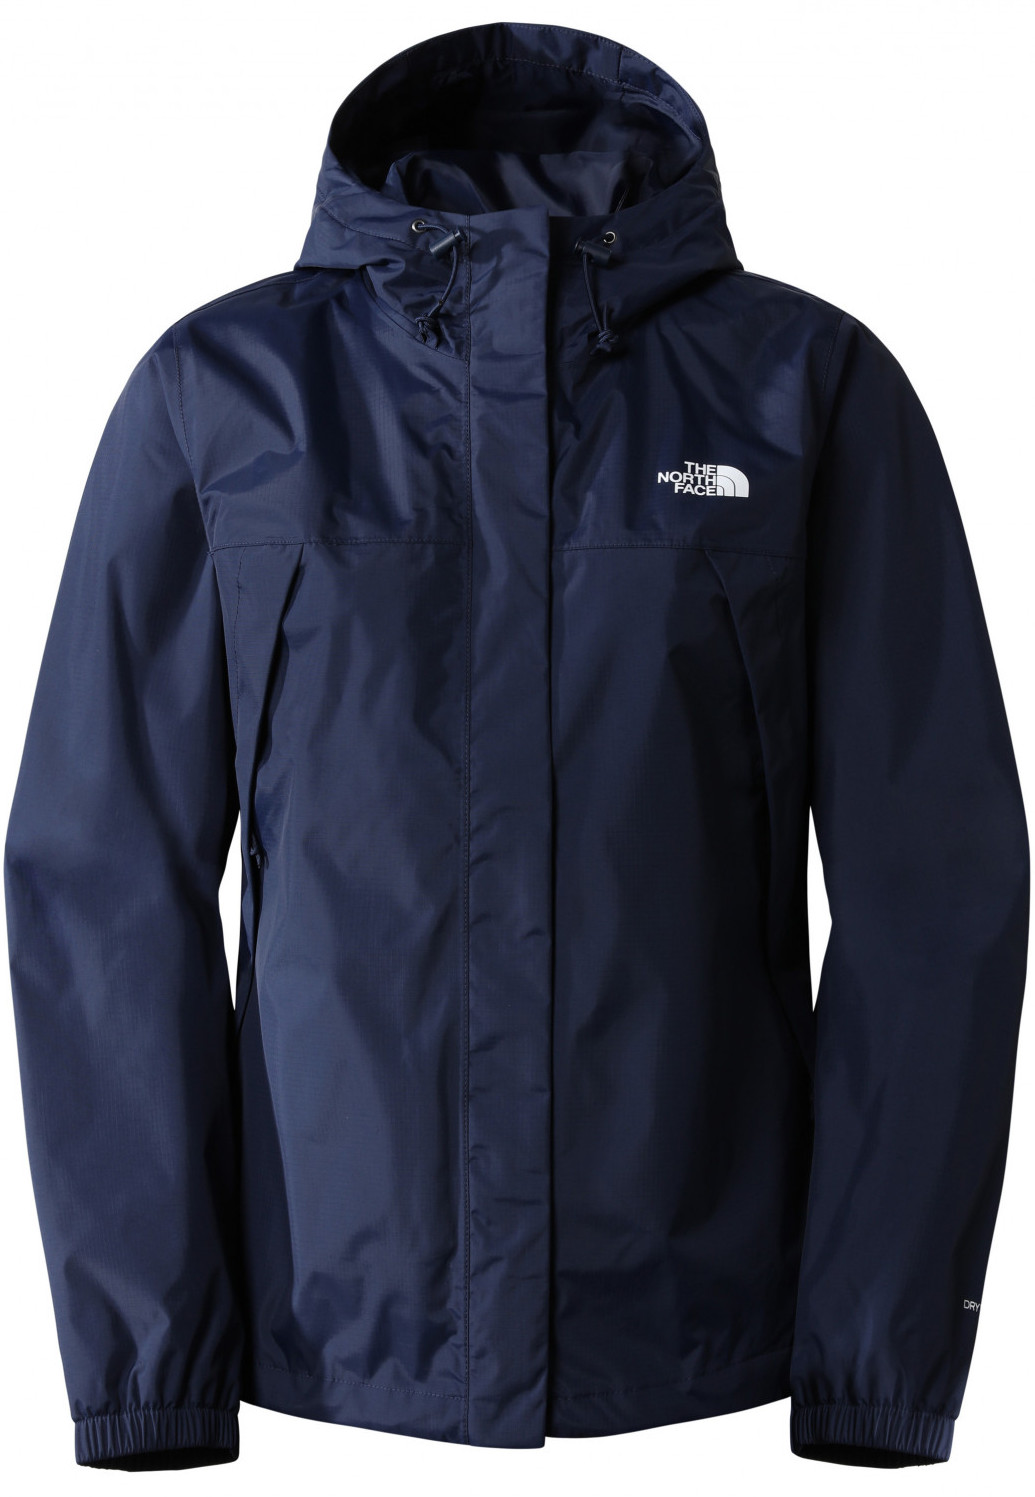 Unlock Wilderness' choice in the Columbia Vs North Face comparison, the Antora Jacket by The North Face